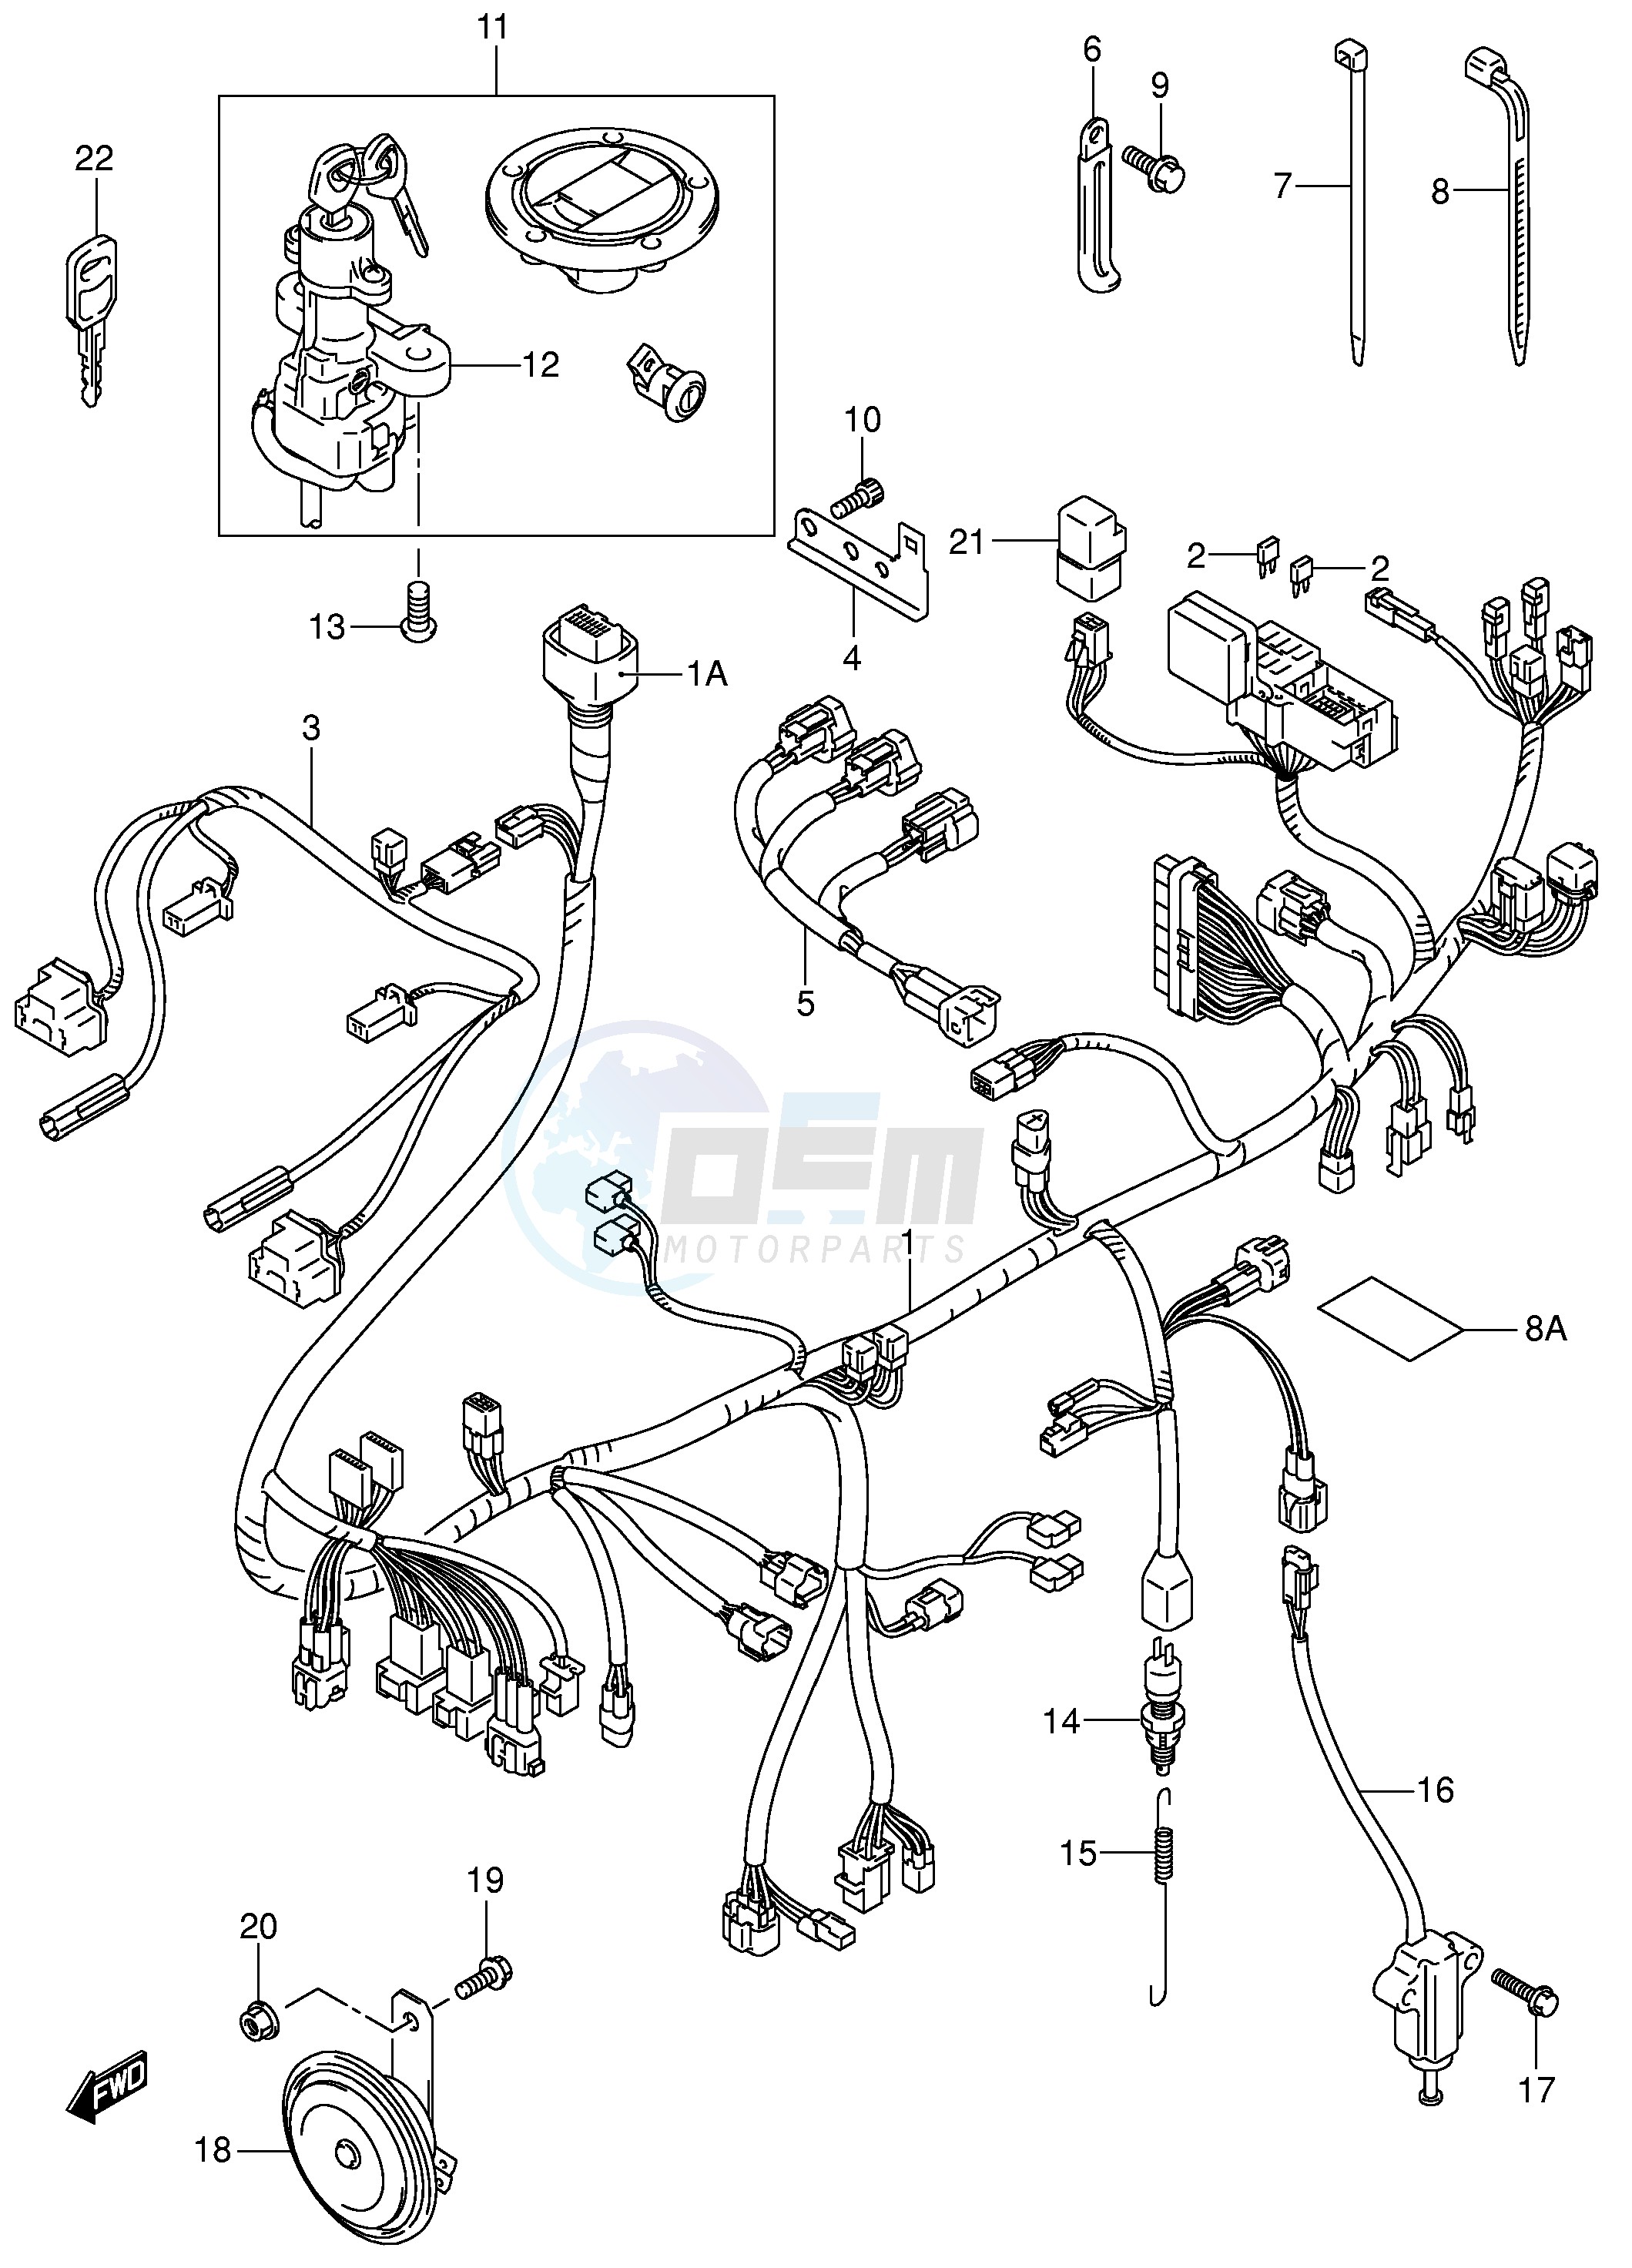 WIRING HARNESS (SV1000S S1 S2) image